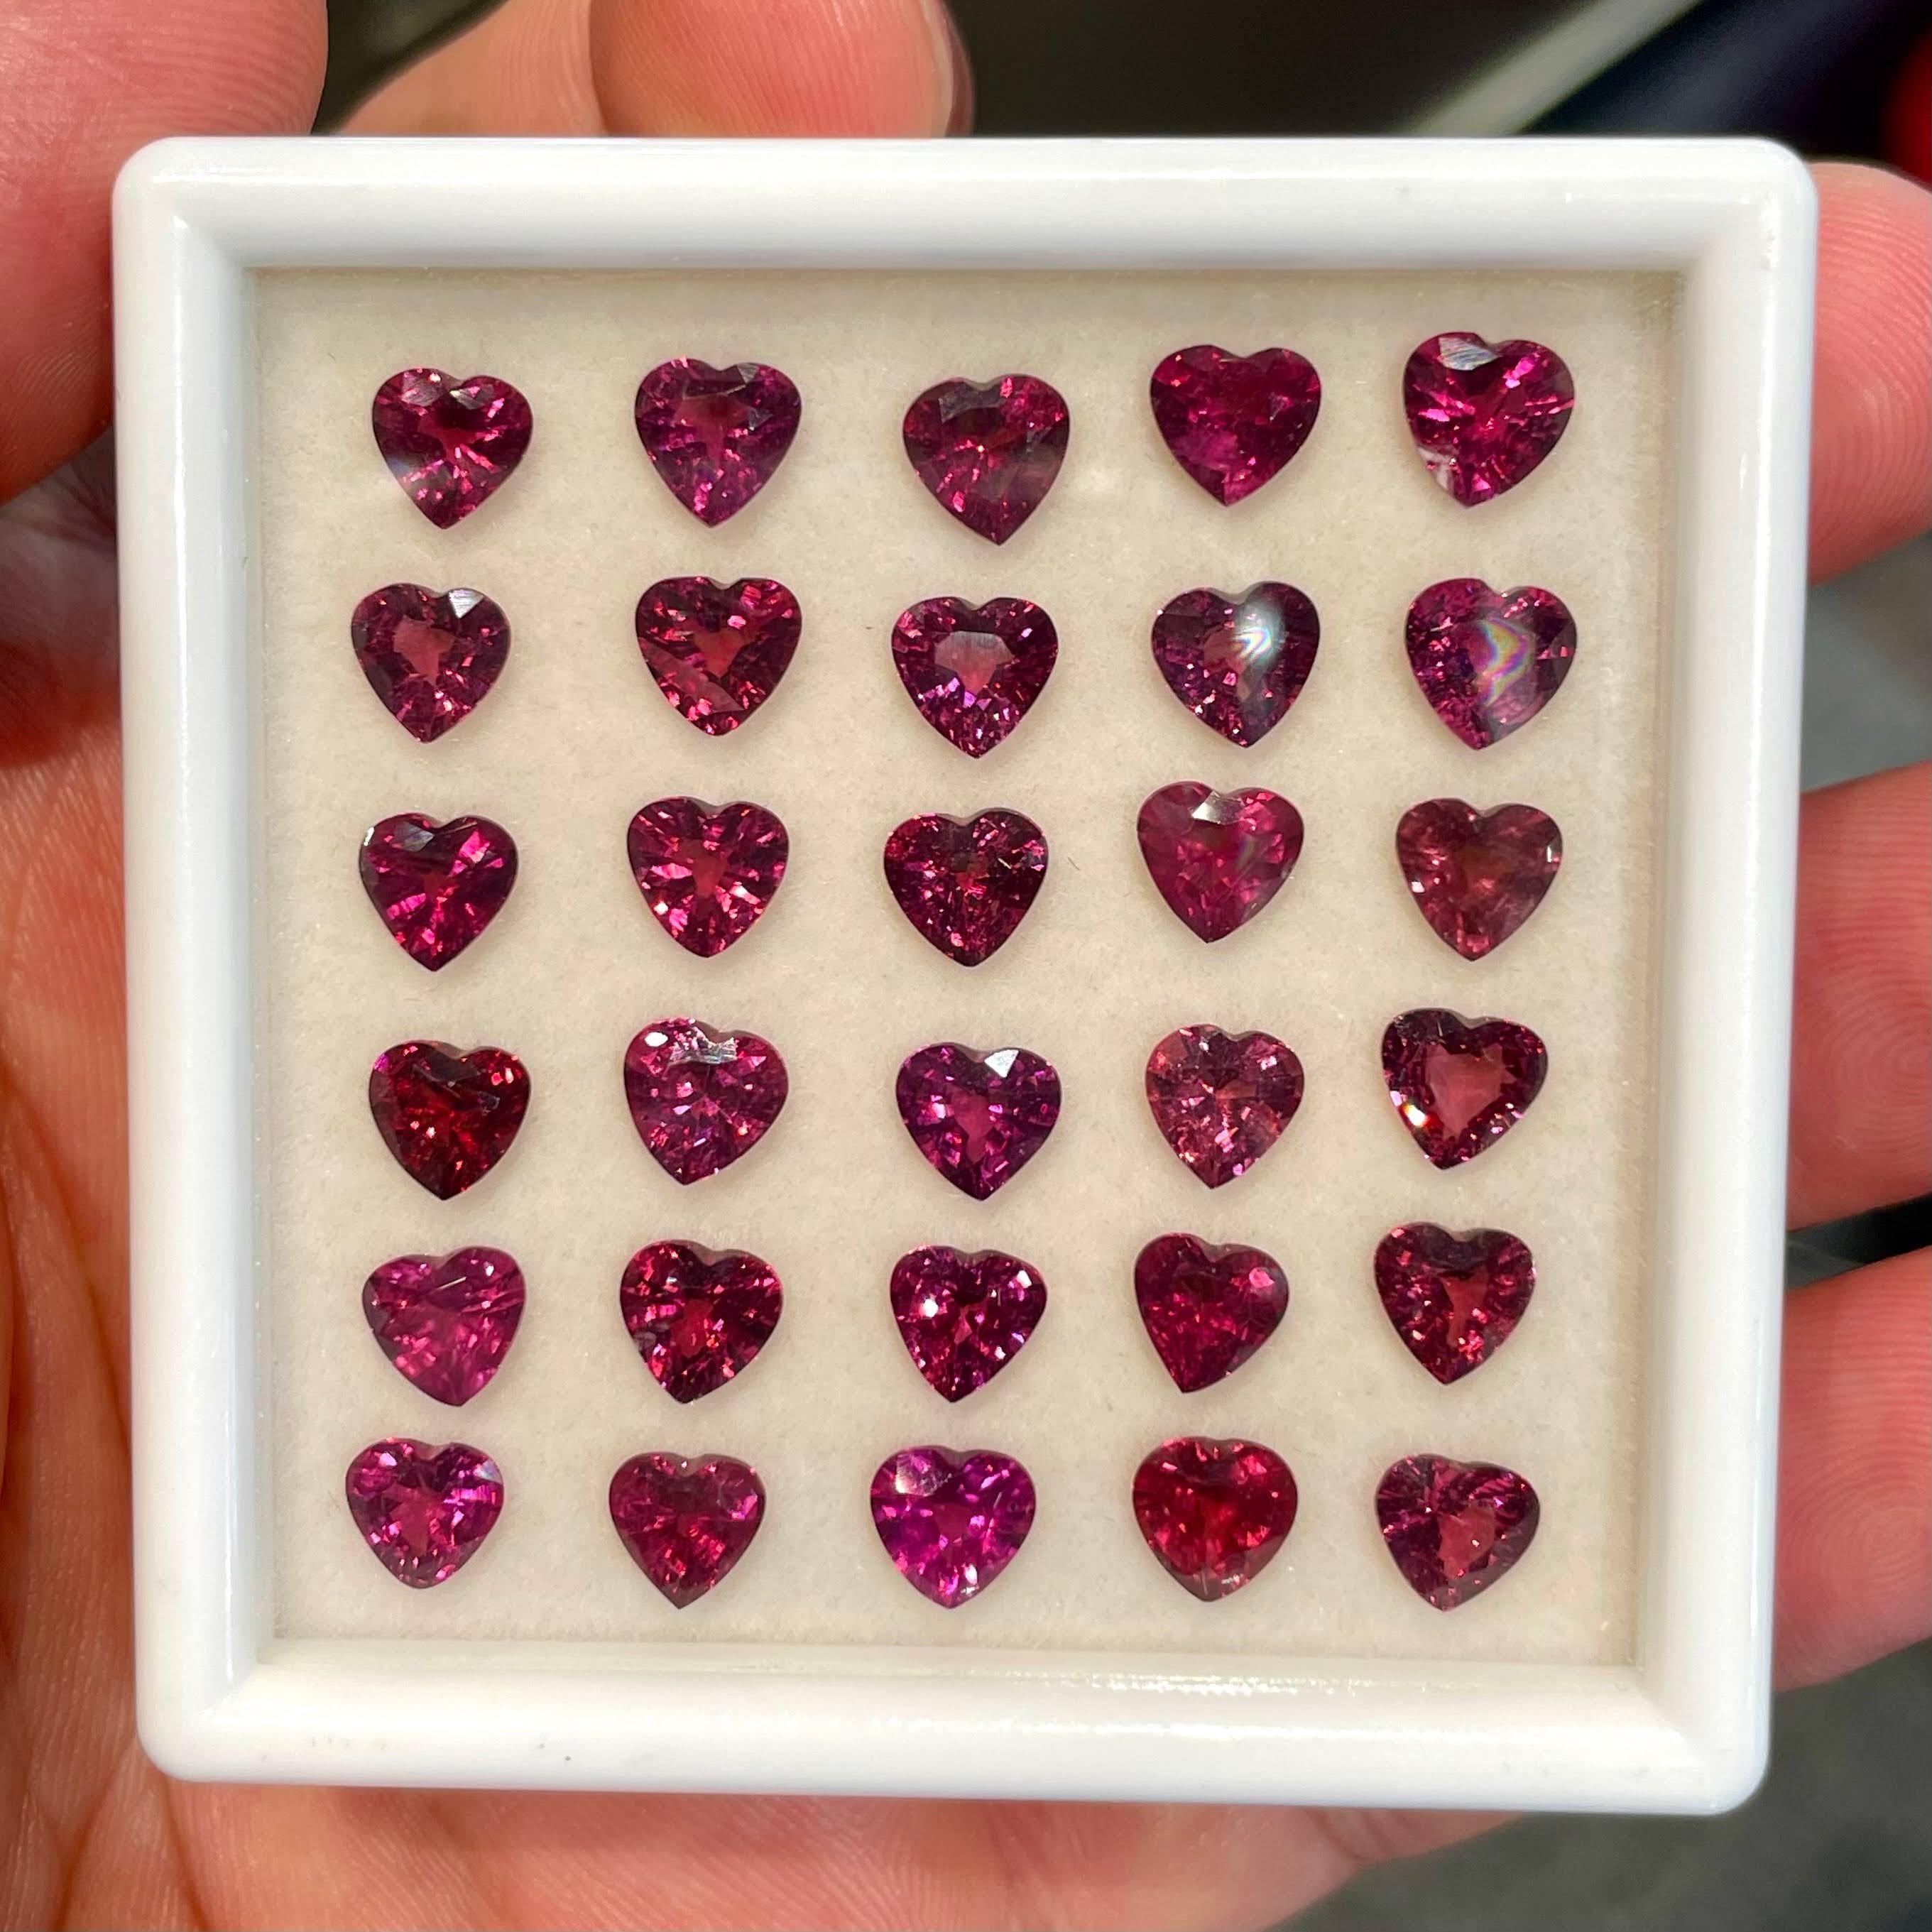 Heart Cut 26.60 Carats Heart Shaped Loose Red Garnet Lot Madagascar's Gemstone (In Box) For Sale